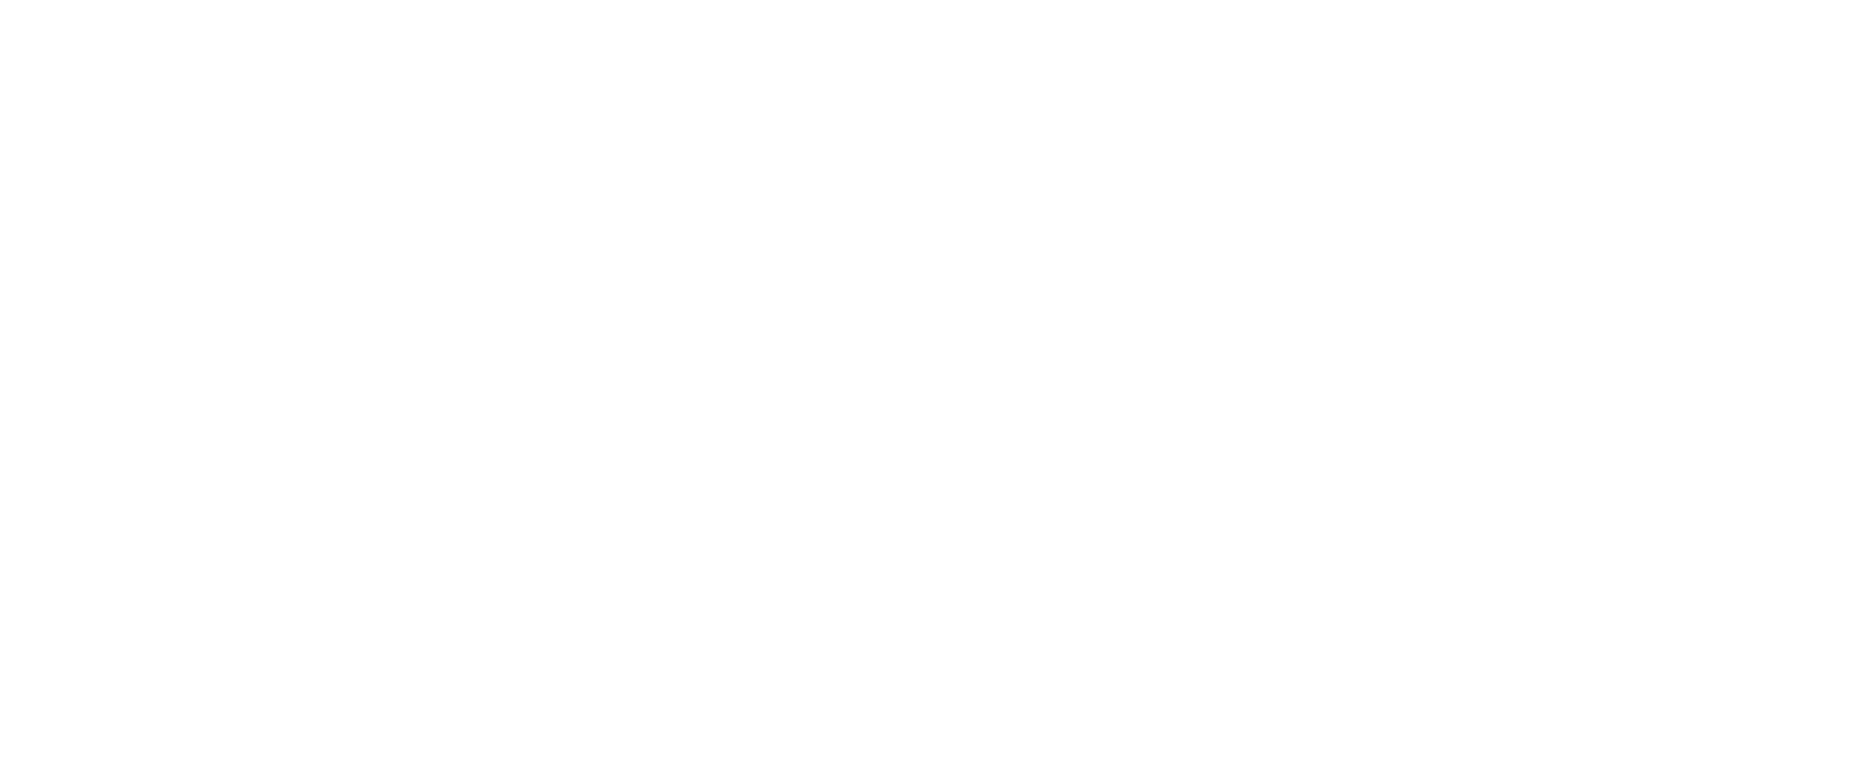 Aloha Beer Logo - Craft Brewery and Taproom in Honolulu, HI - Client of Select Valet Hawaii Jobs